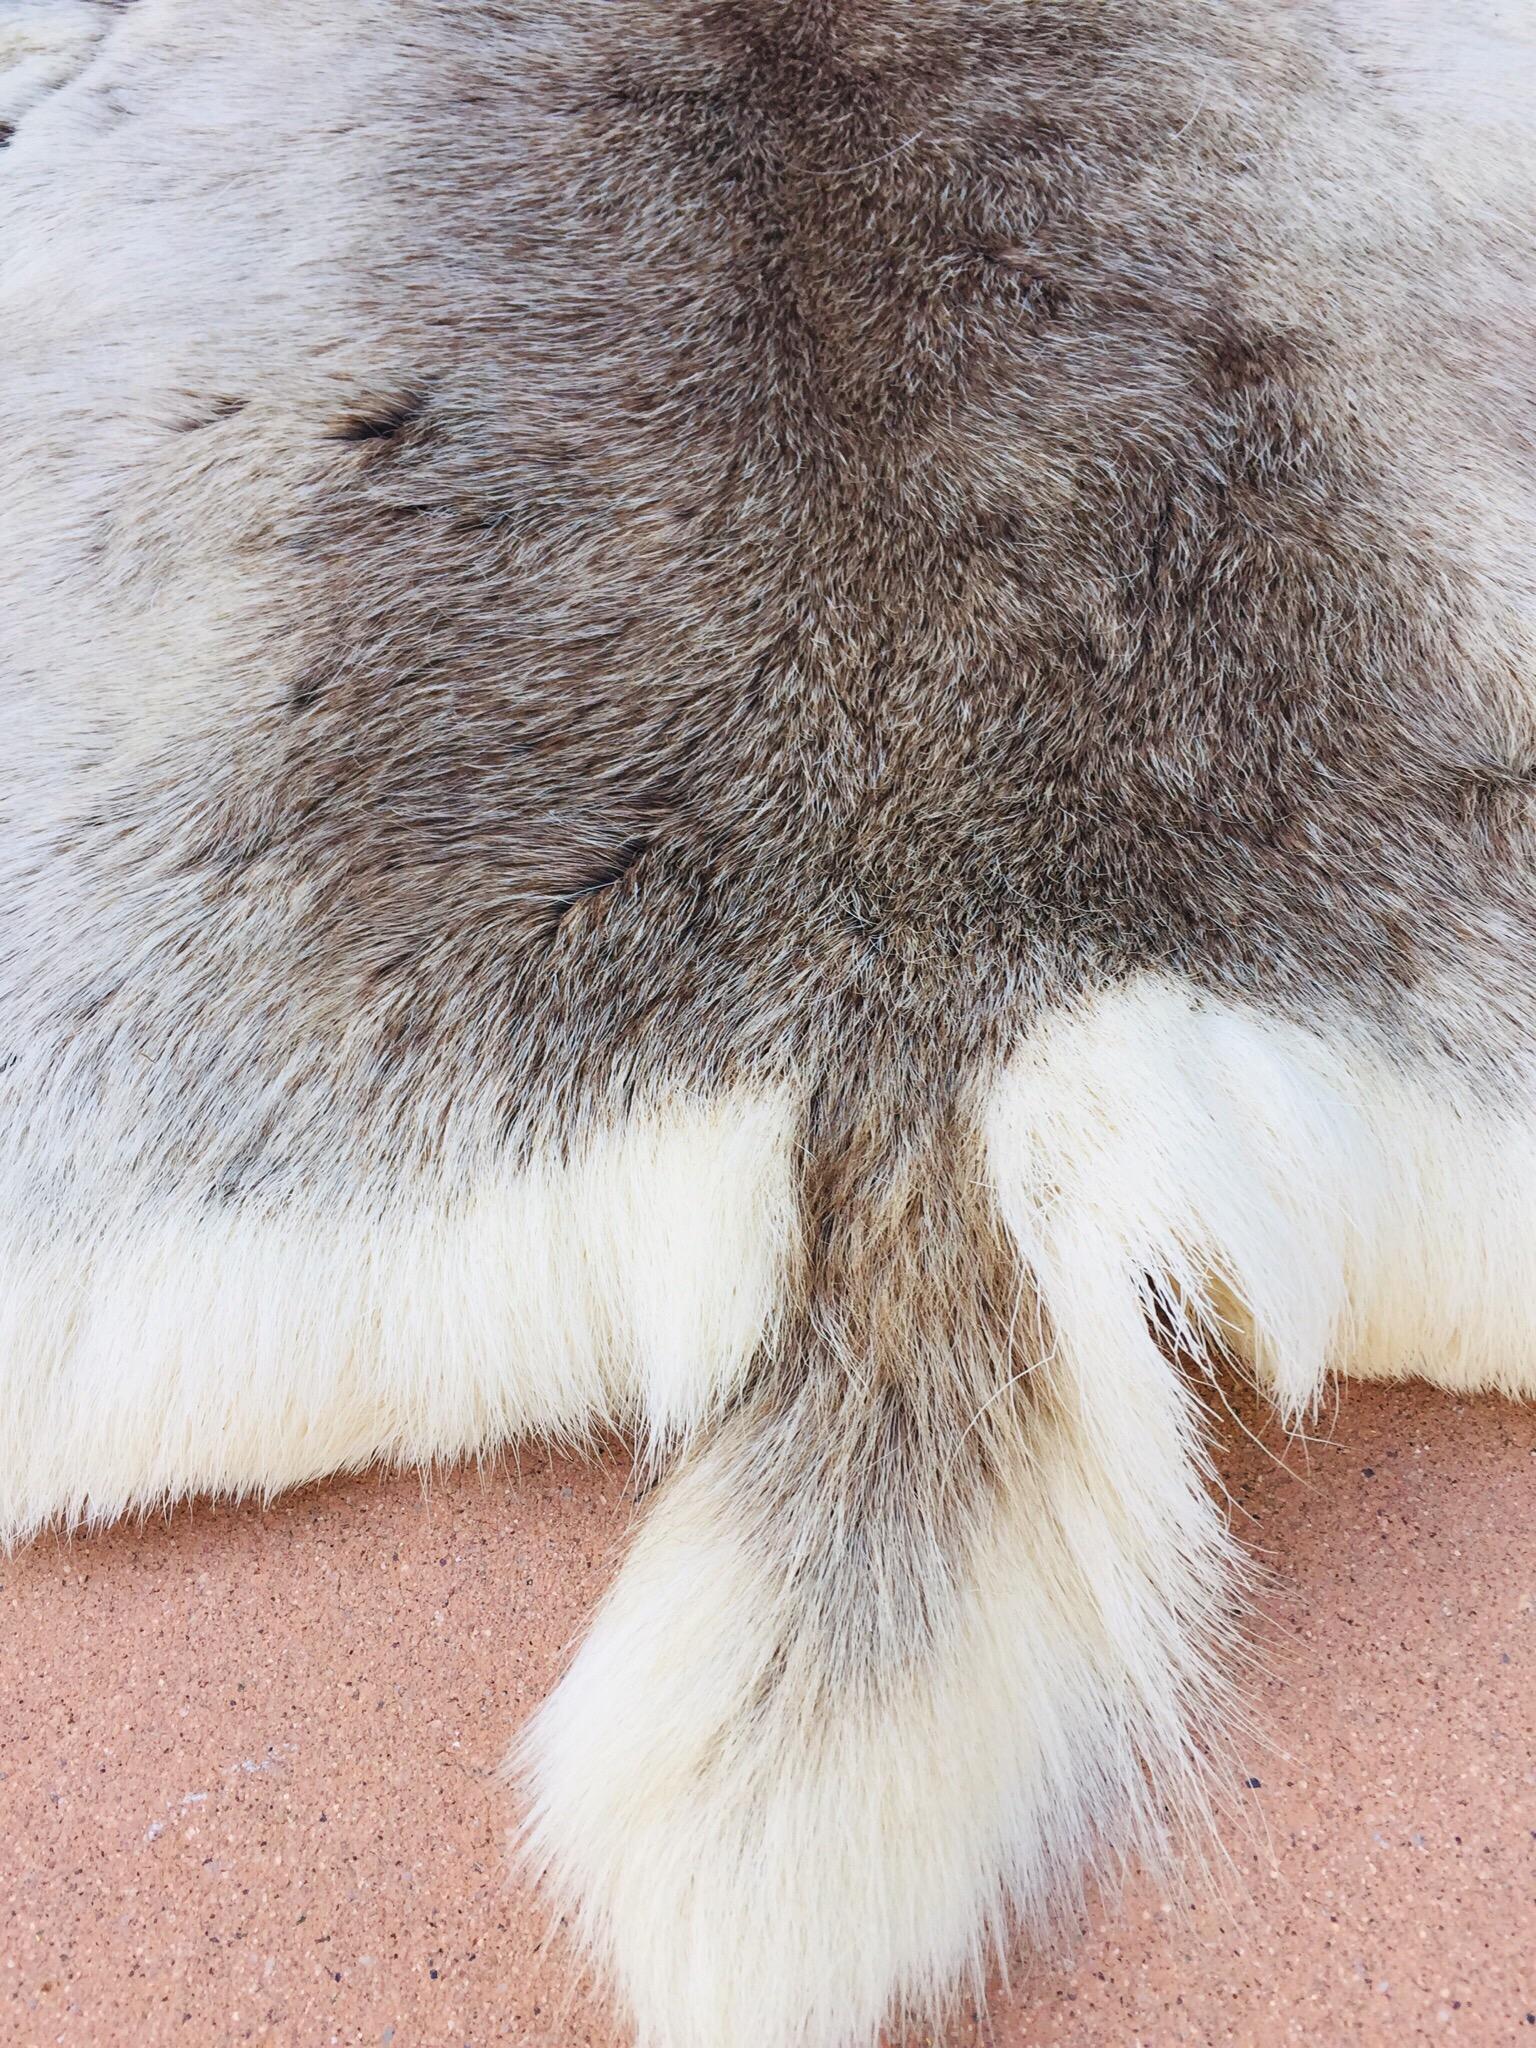 Authentic Scandinavian Reindeer skin hide.
The reindeer also known as caribou in North America, is a species of deer with circumpolar distribution, native to mountainous regions of northern Europe, Siberia, and North America. 
Great throw hide